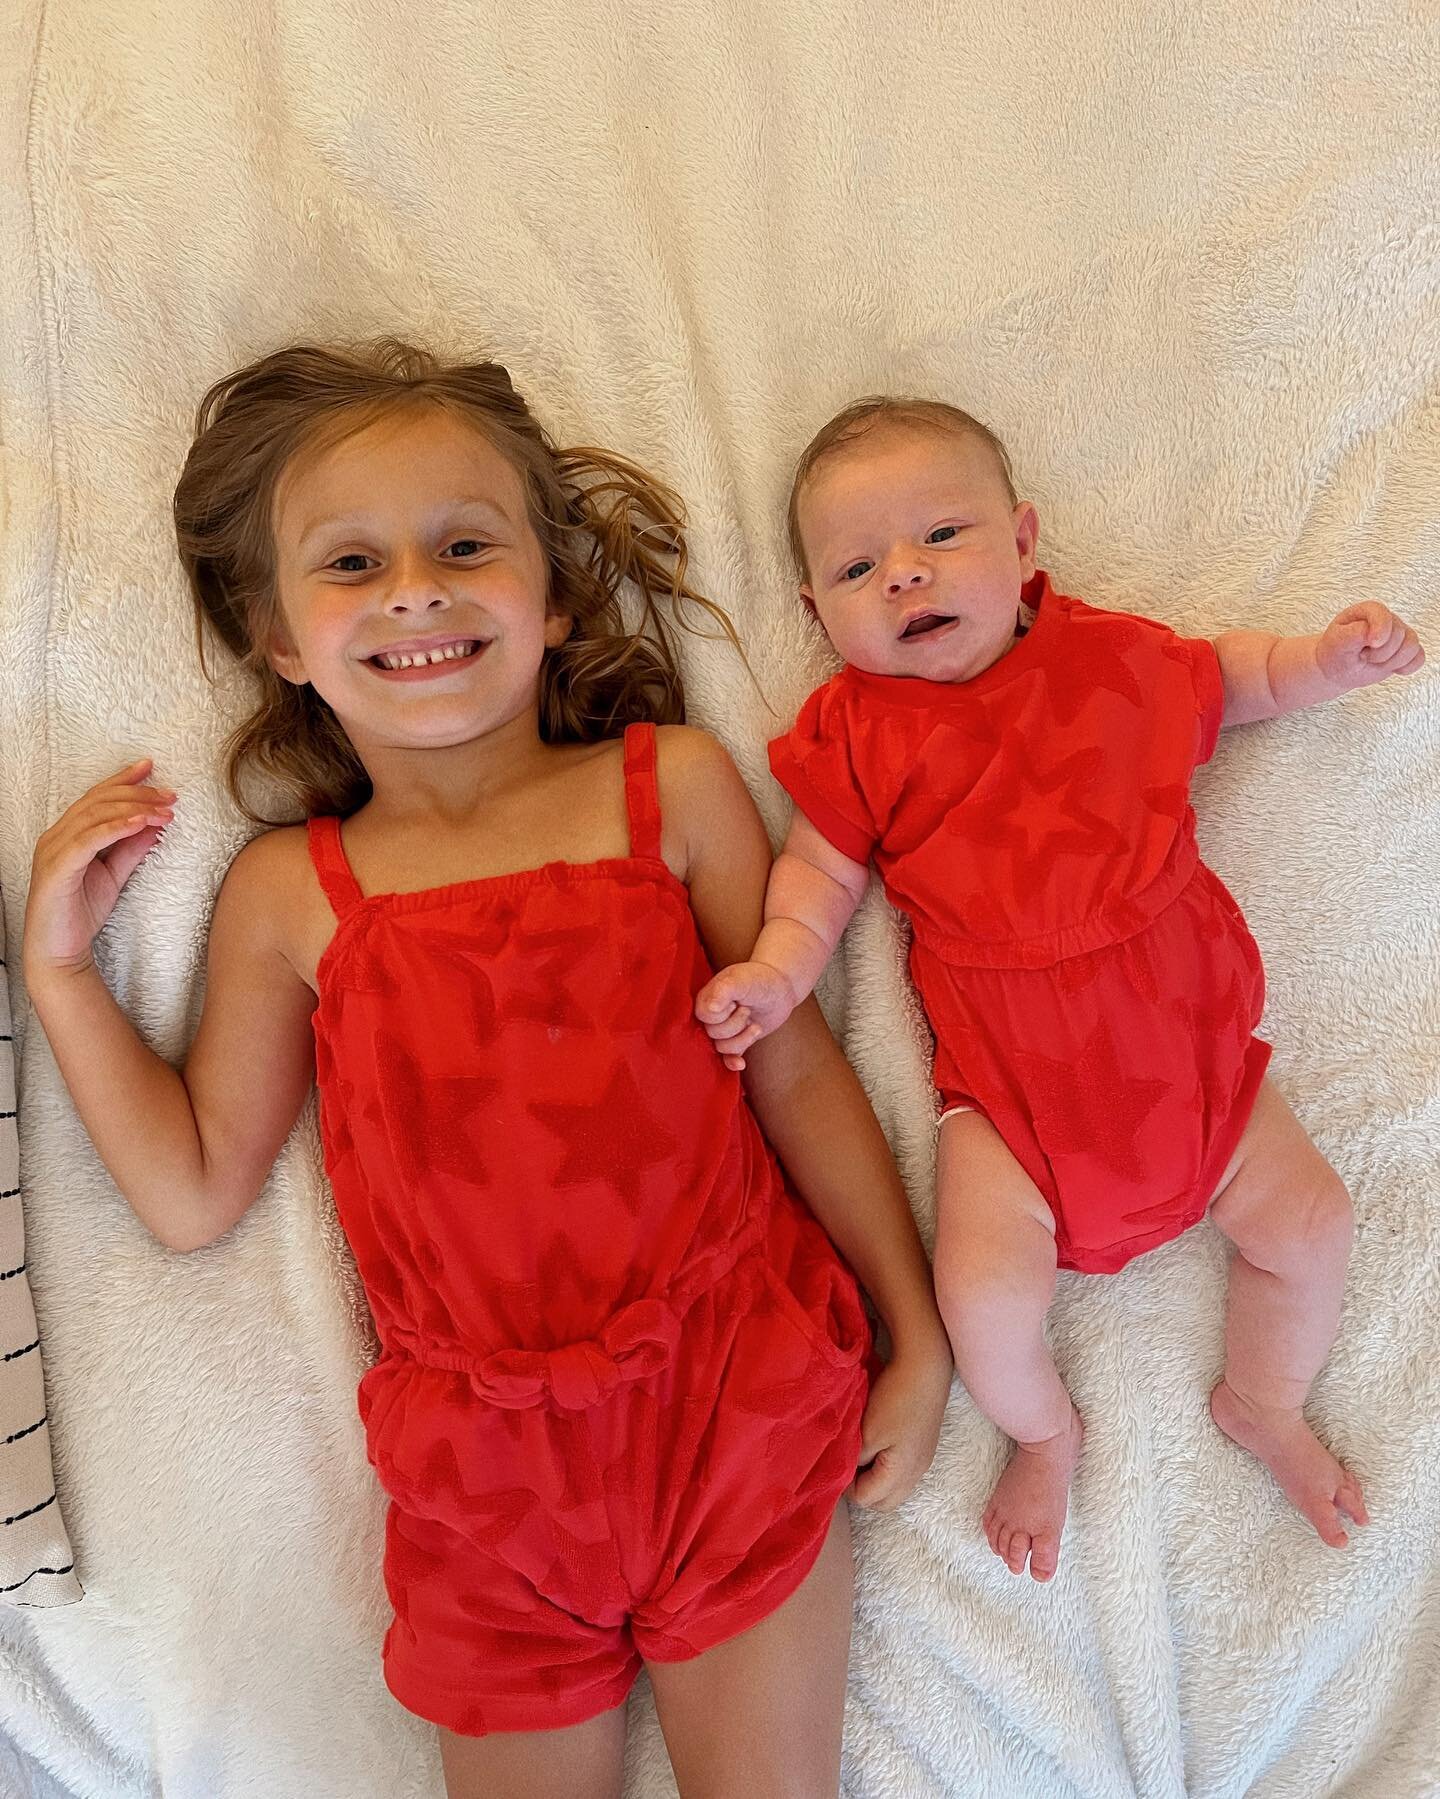 Kinsley is so in love with her little cousin Thea (and getting to match her for the rest of time). Happy July 4th!!! 😇🥰😍❤️🇺🇸